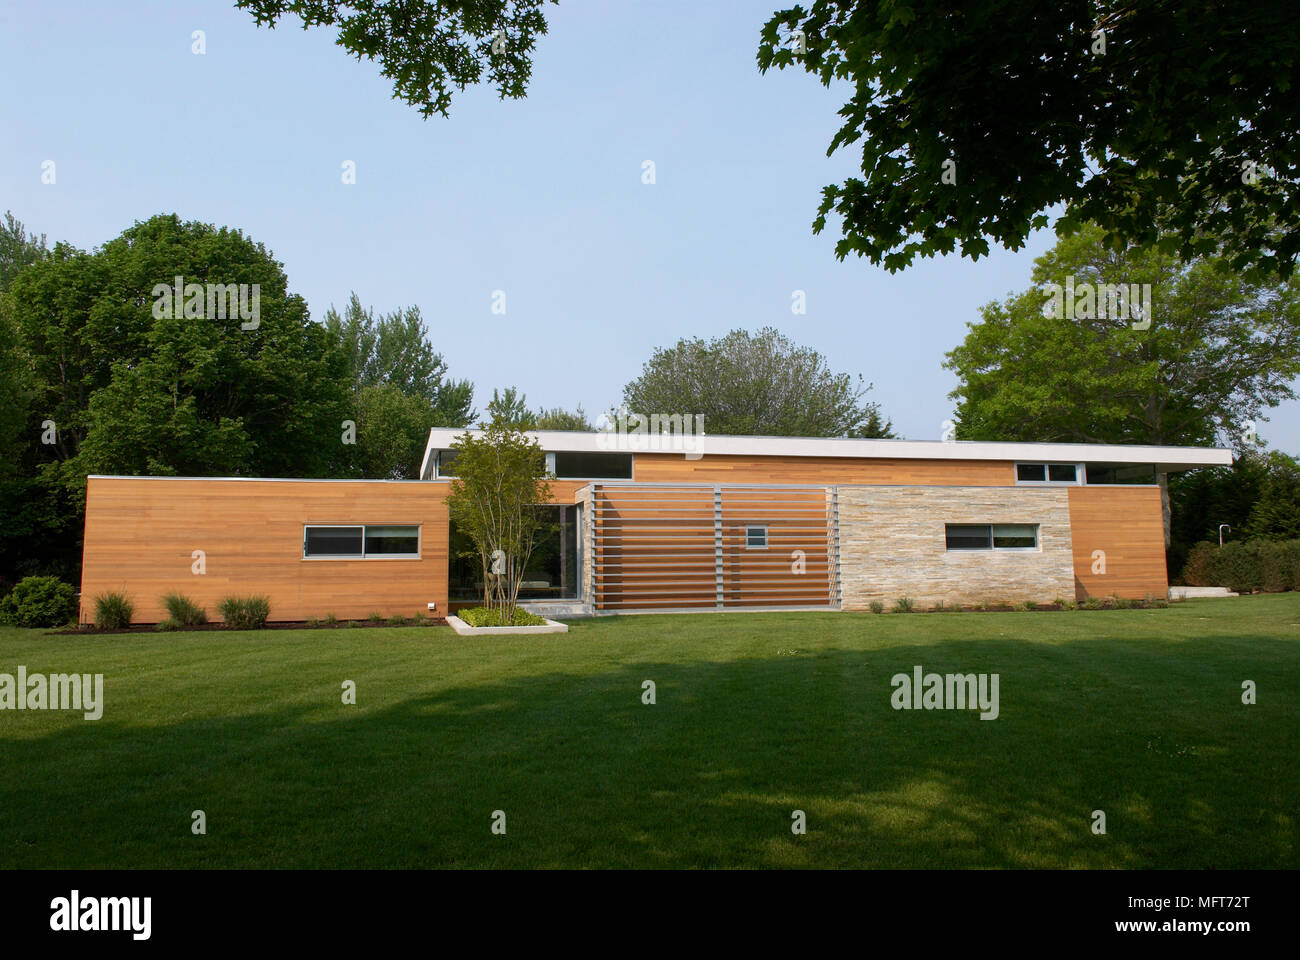 Exterior of new build single storey house and garden Stock Photo